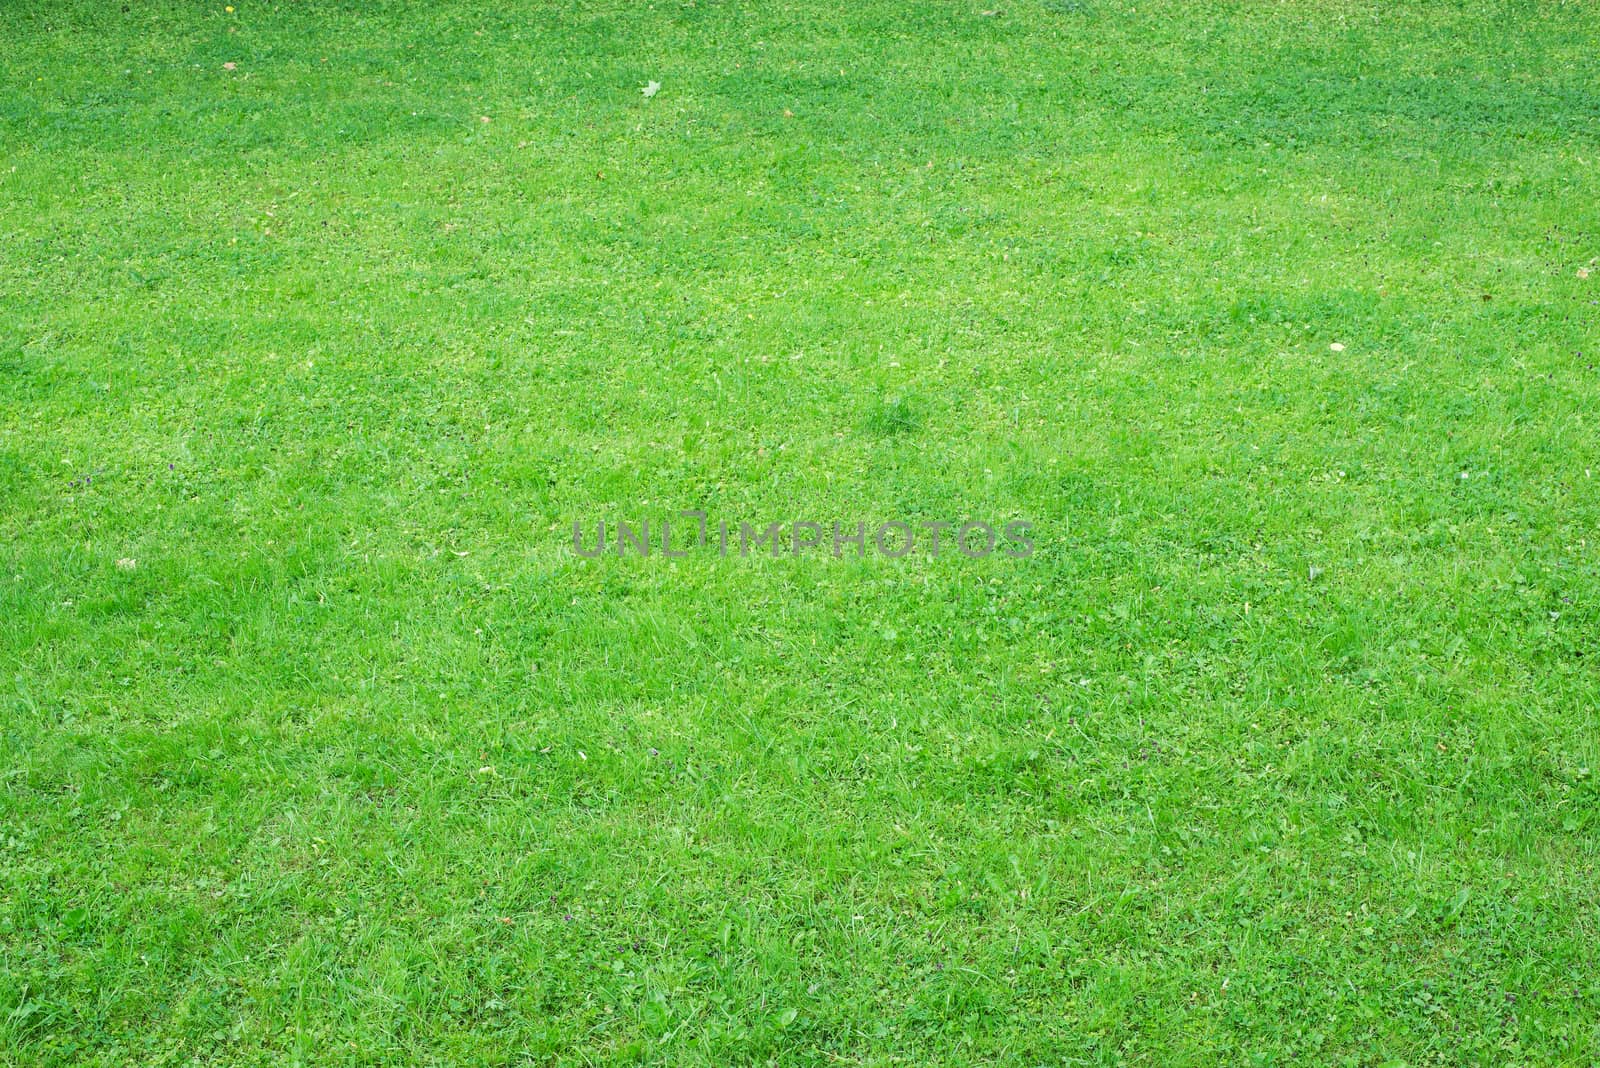 Grass with different plants, nature background. Close-up view